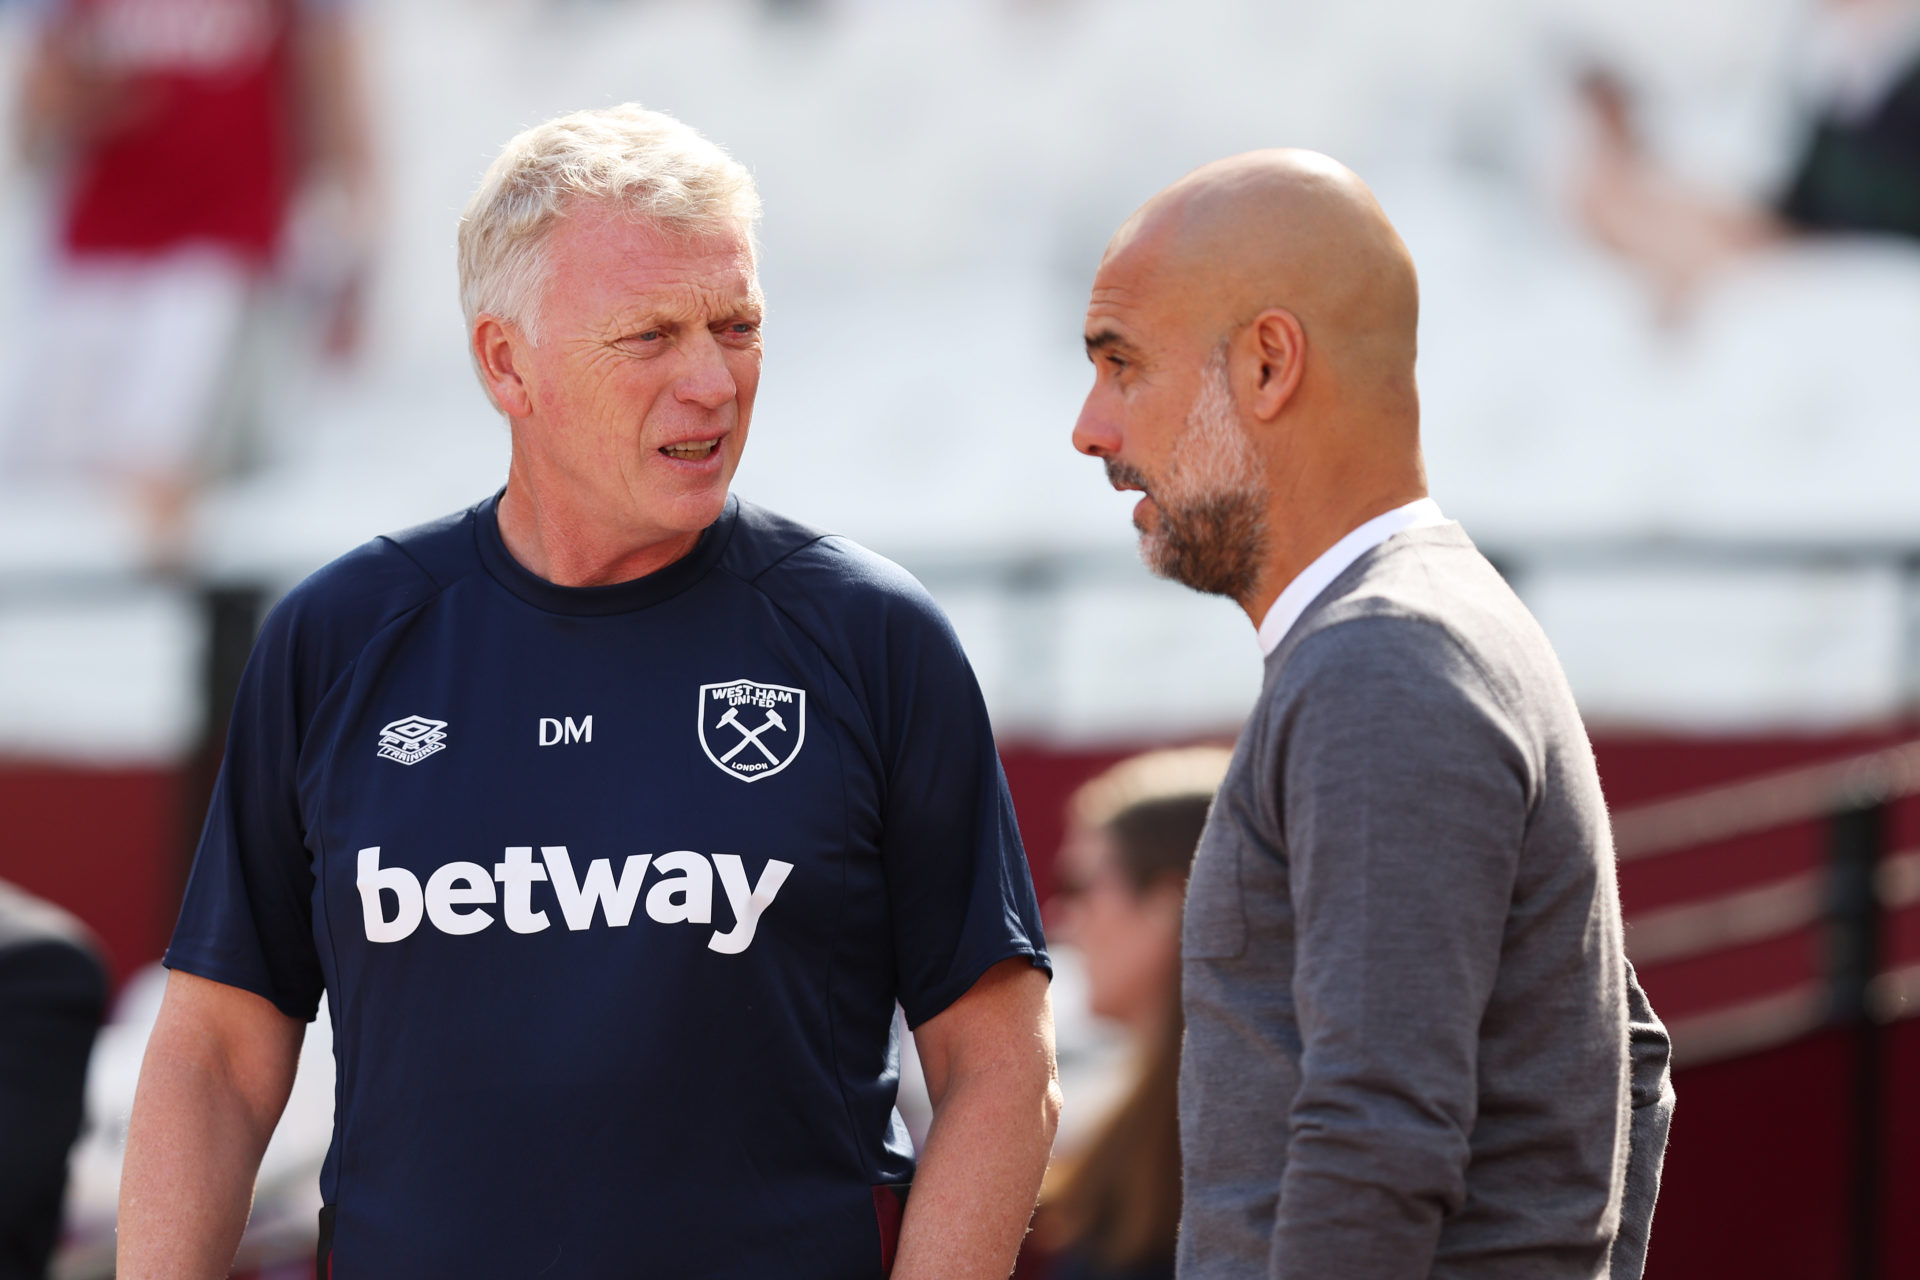 Star talks up Moyes like he’s Guardiola and Burnley as if they’re Real